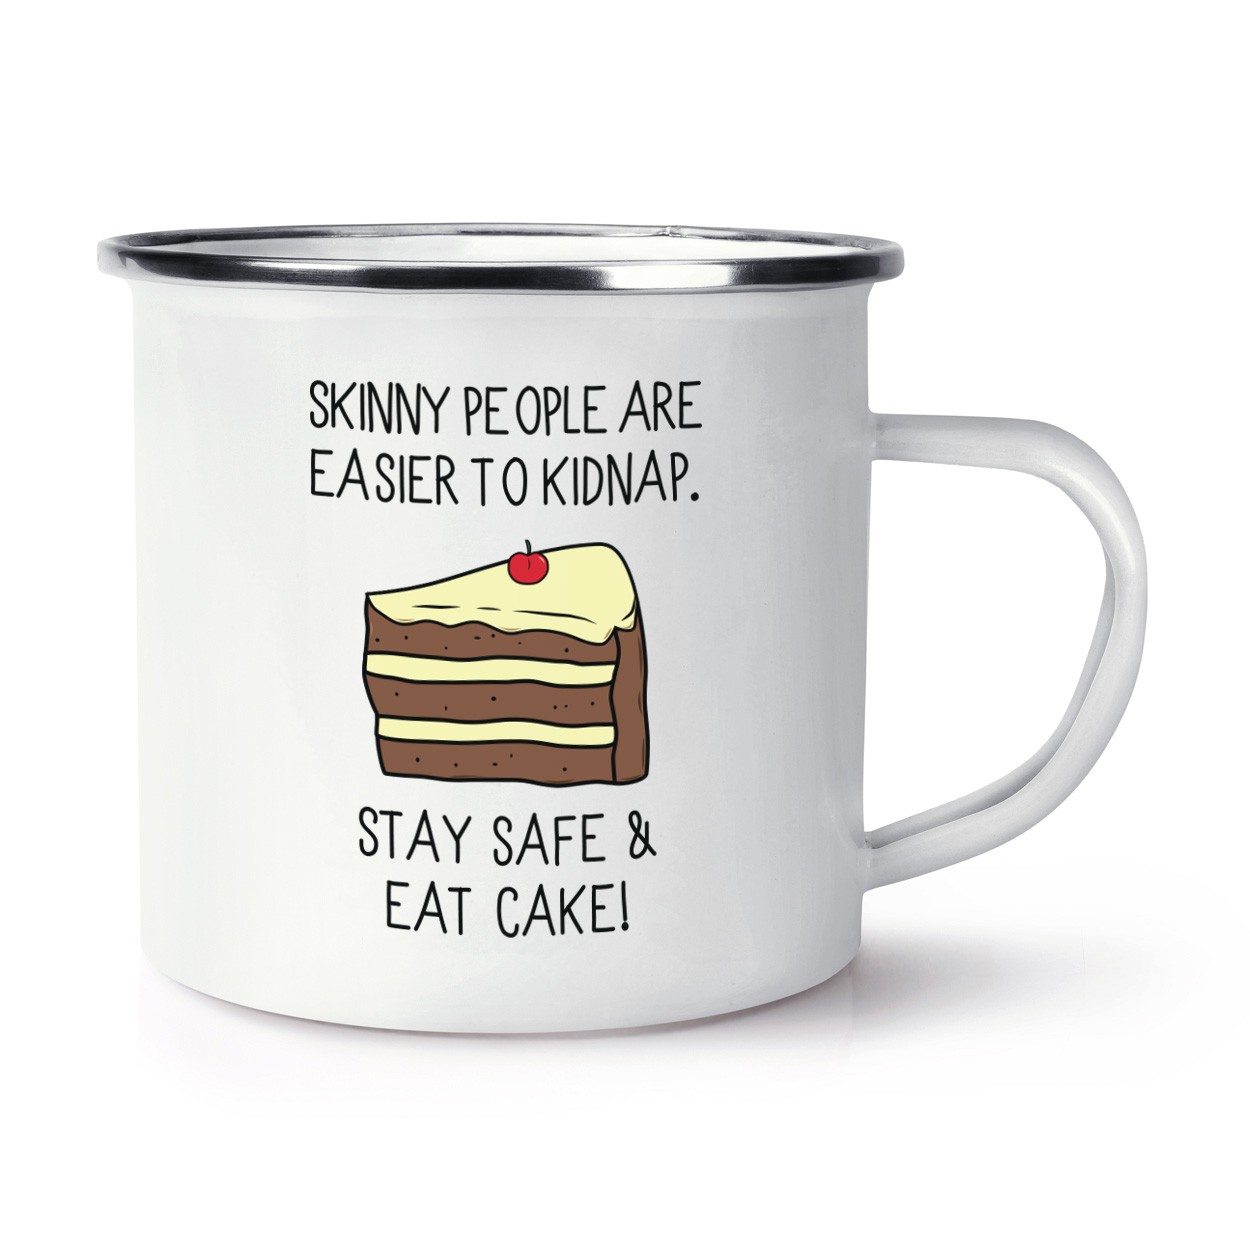 Skinny People Are Easier To Kidnap Stay Safe & Eat Cake Retro Enamel Mug Cup